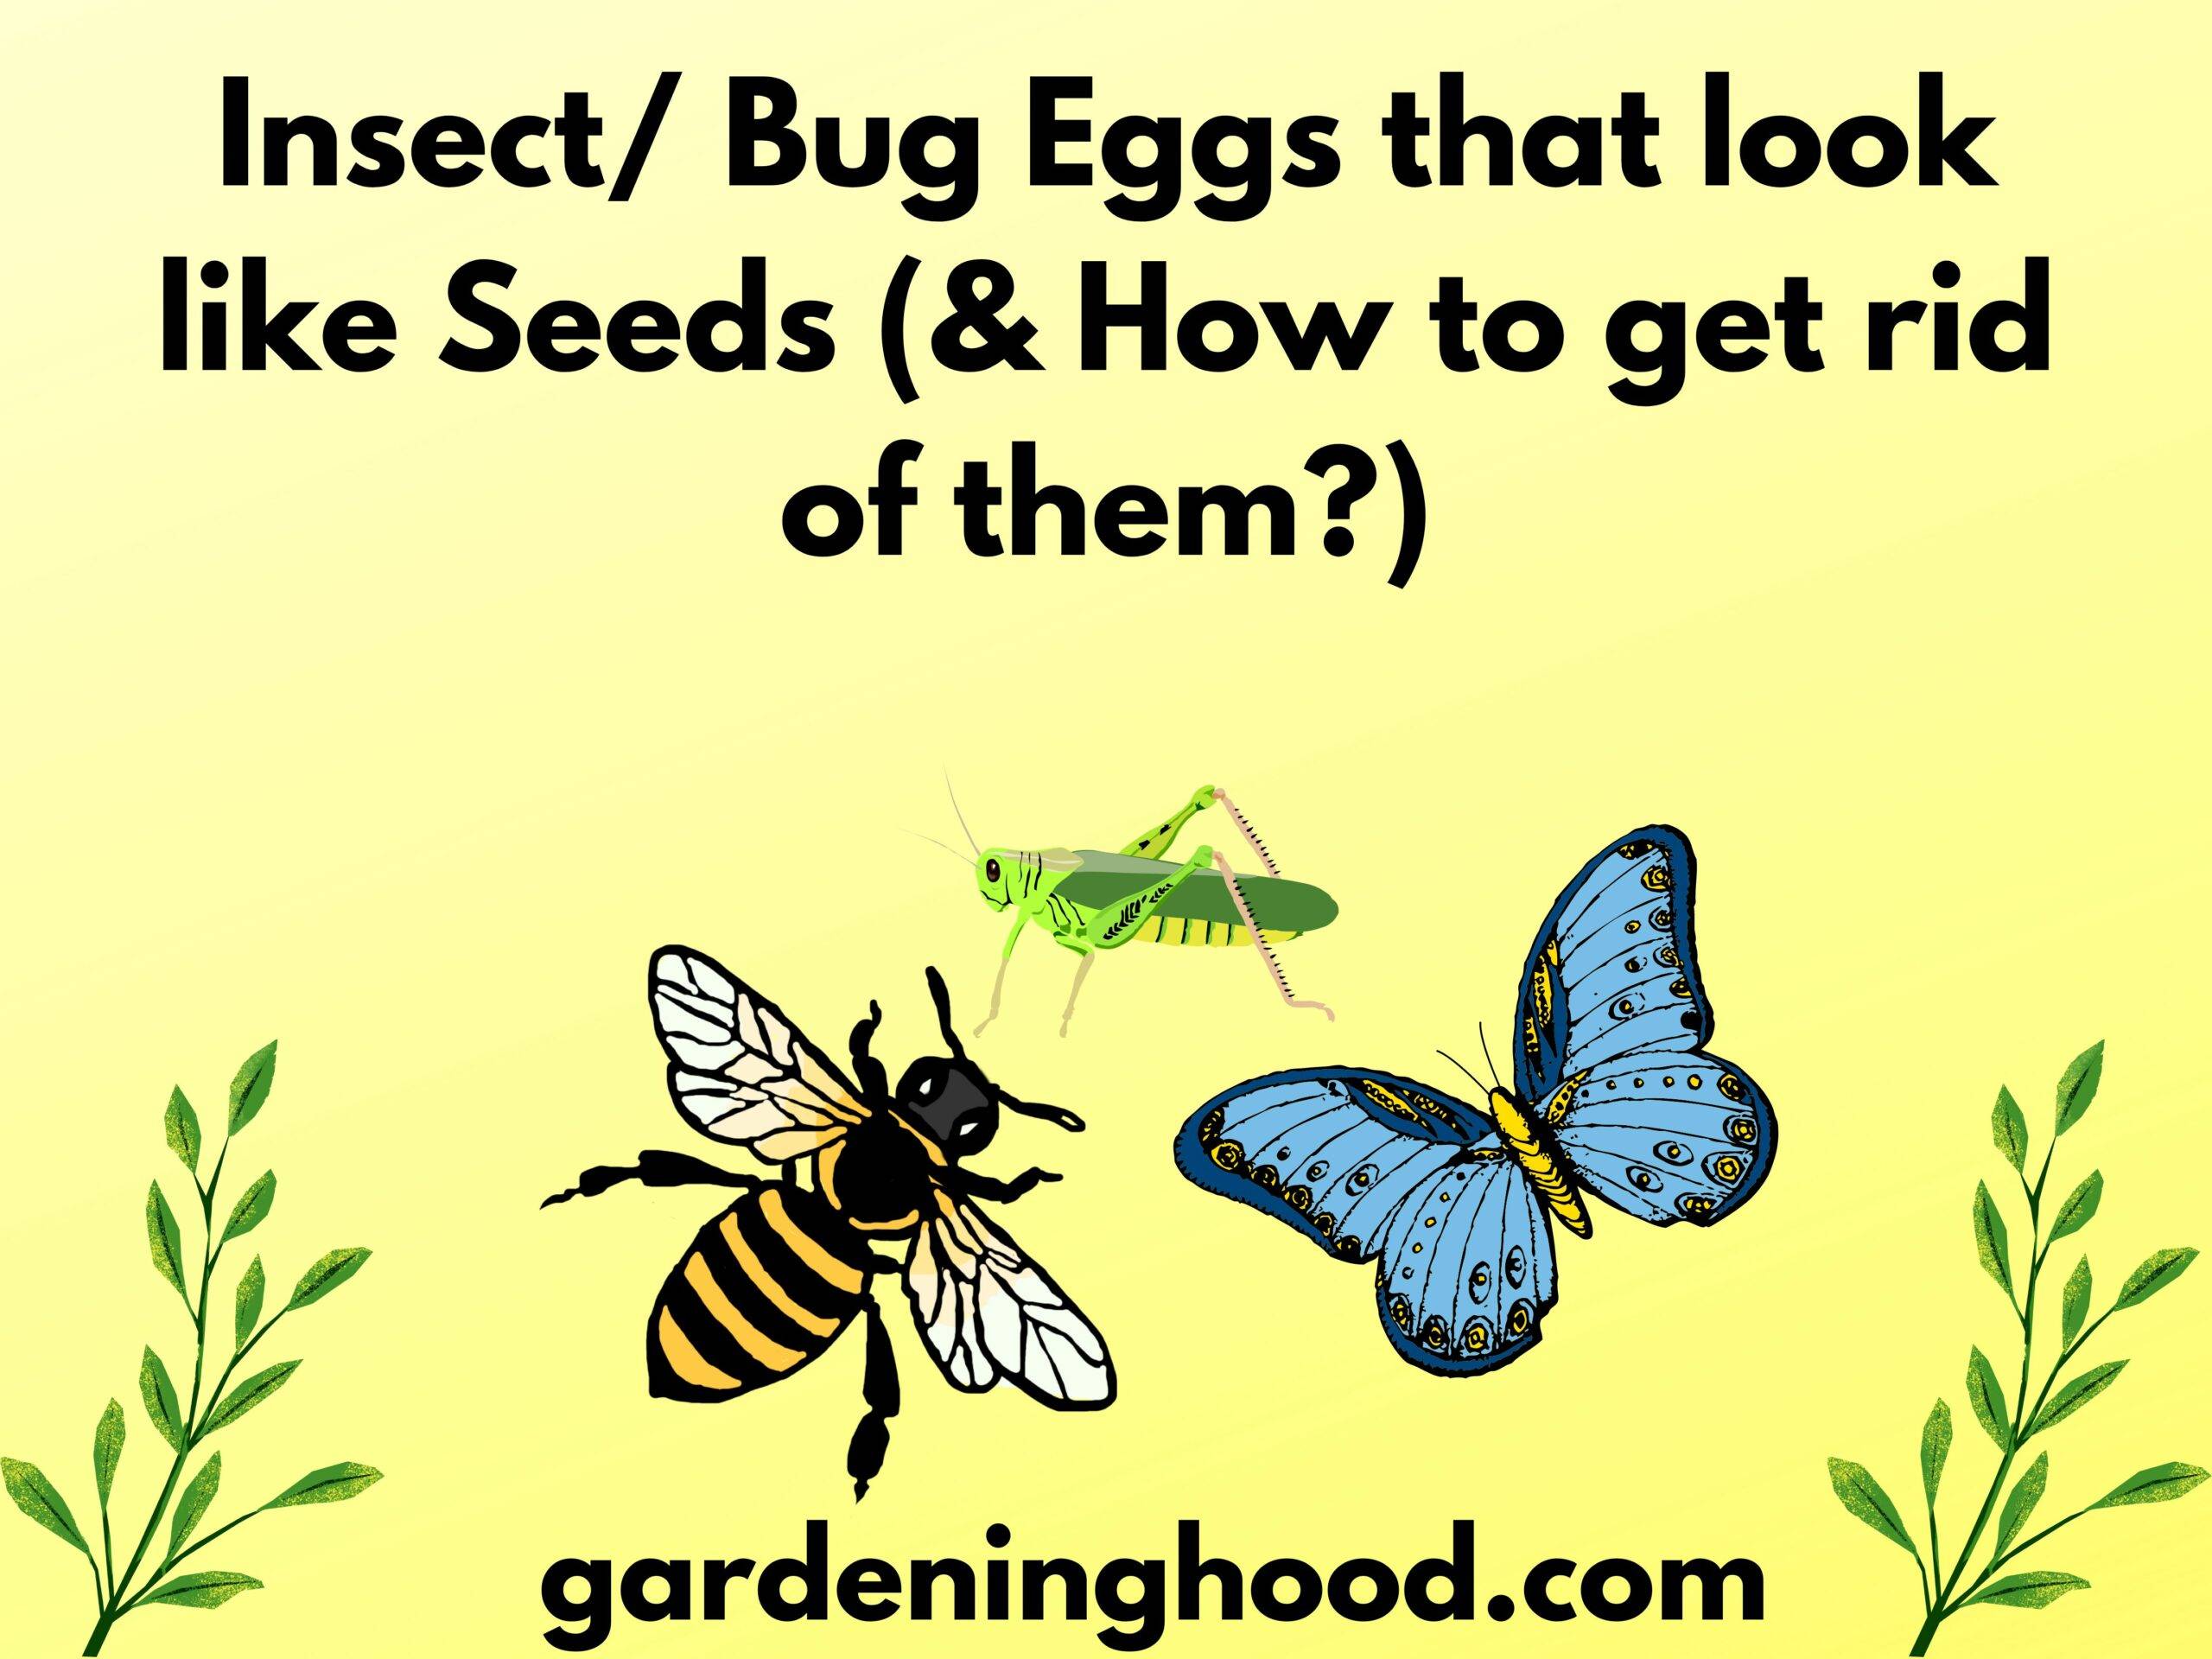 Insect/ Bug Eggs that look like Seeds (& How to get rid of them?)